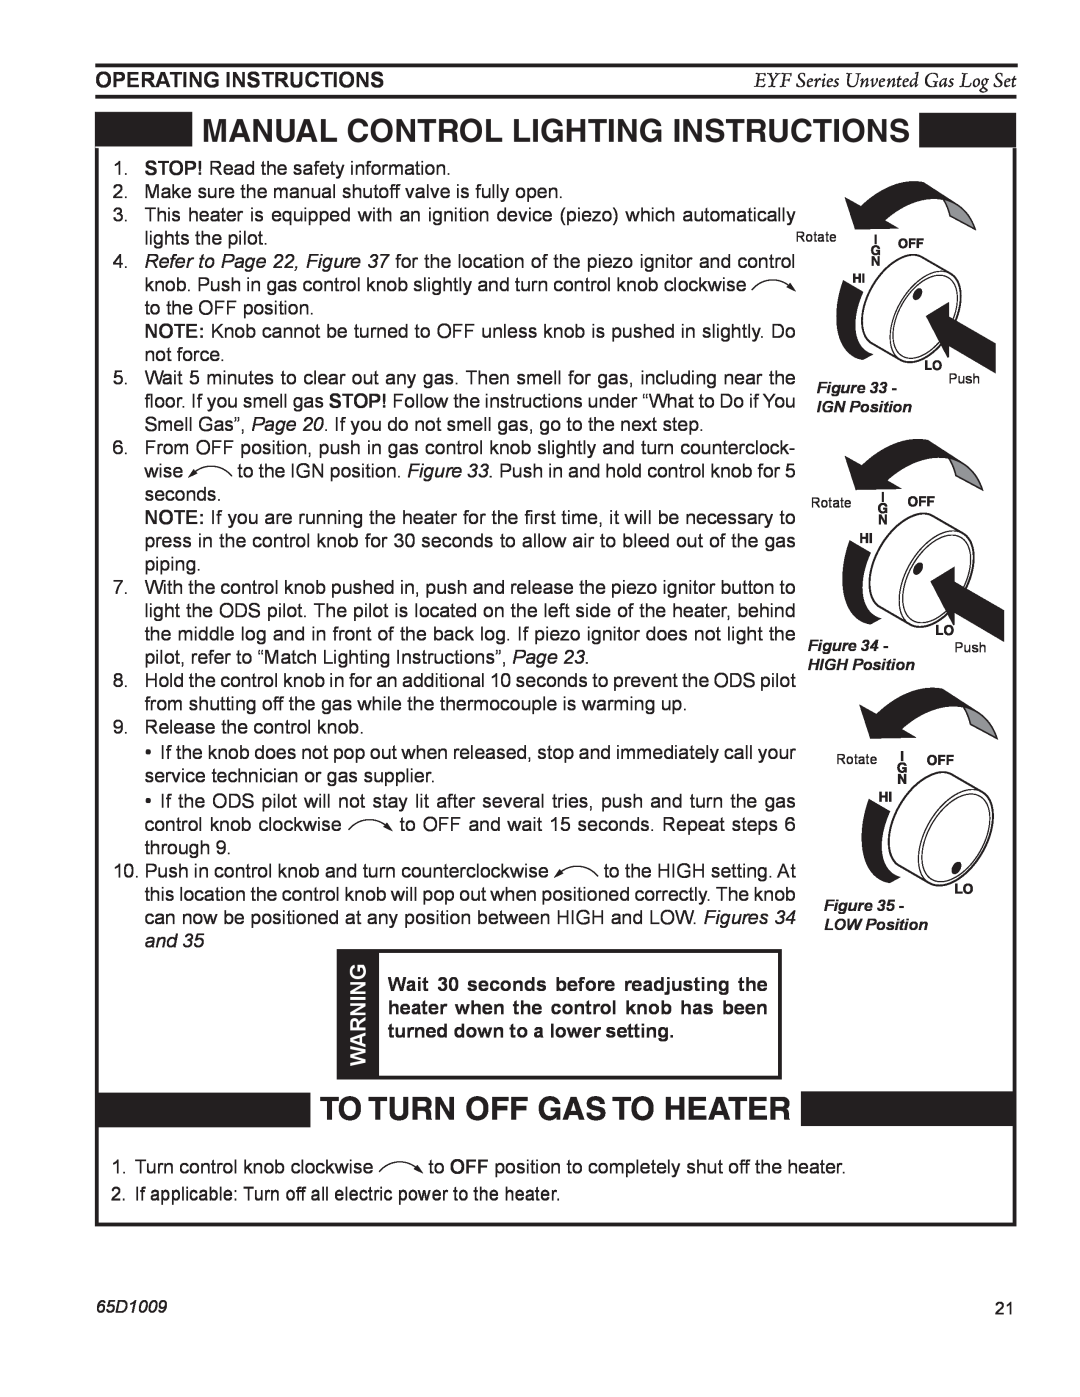 Monessen Hearth EYF18, EYF24 manual MANUAL control lighting instructions, To Turn Off Gas To Heater, Operating Instructions 